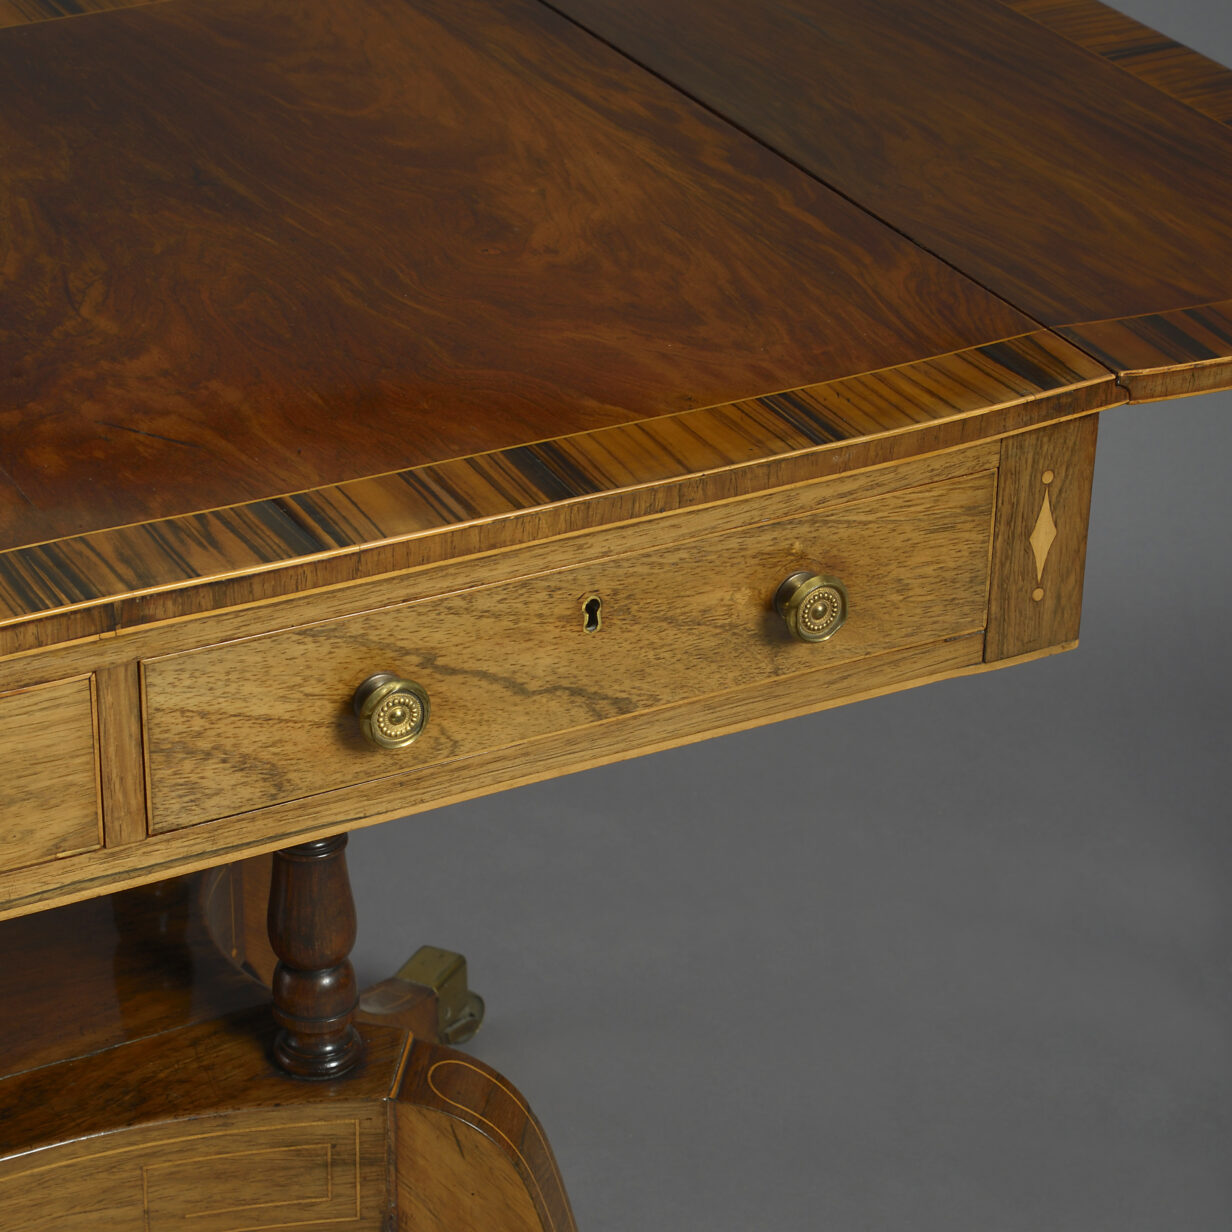 Early 19th century regency period rosewood and calamander wood sofa table